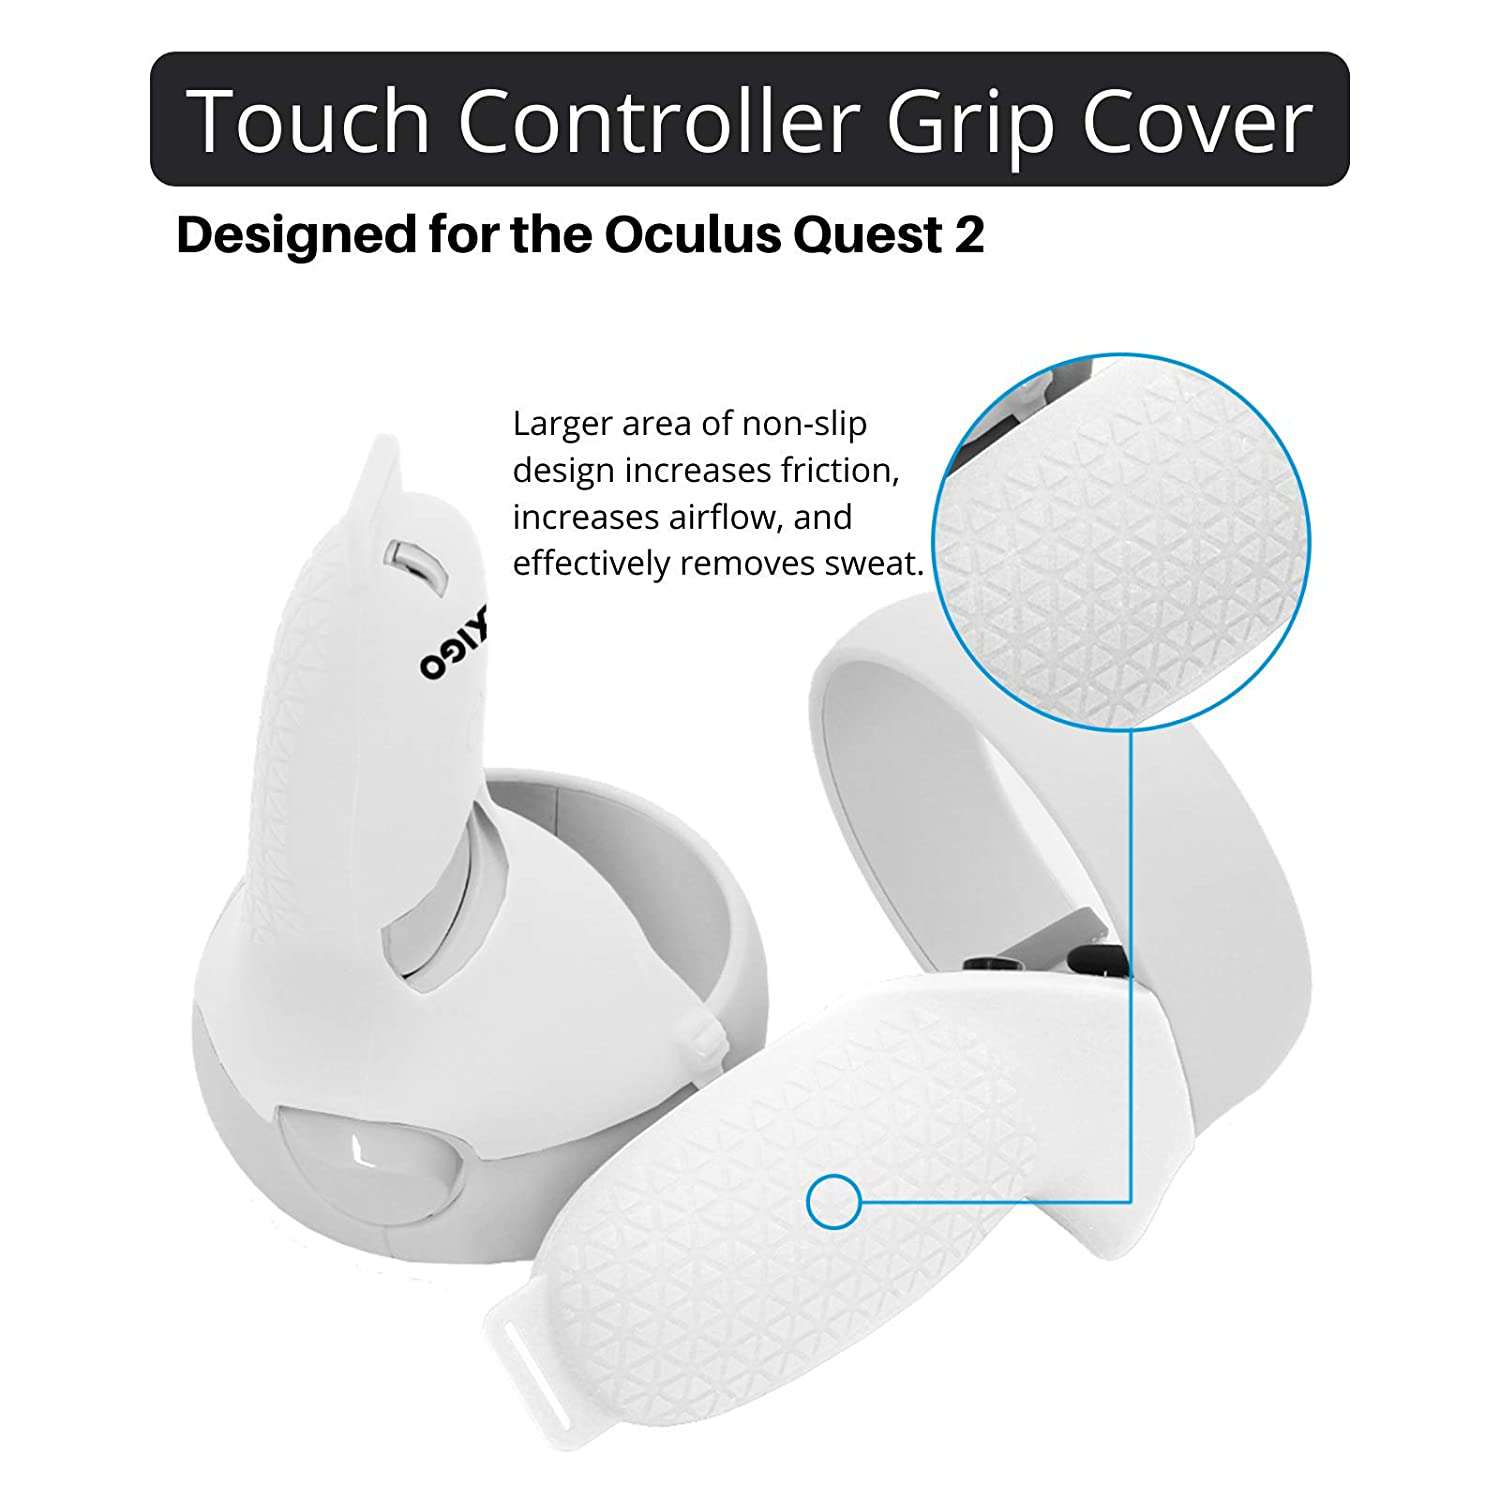 Enhanced grip, airflow, and sweat absorption with the Controller Grip Cover.